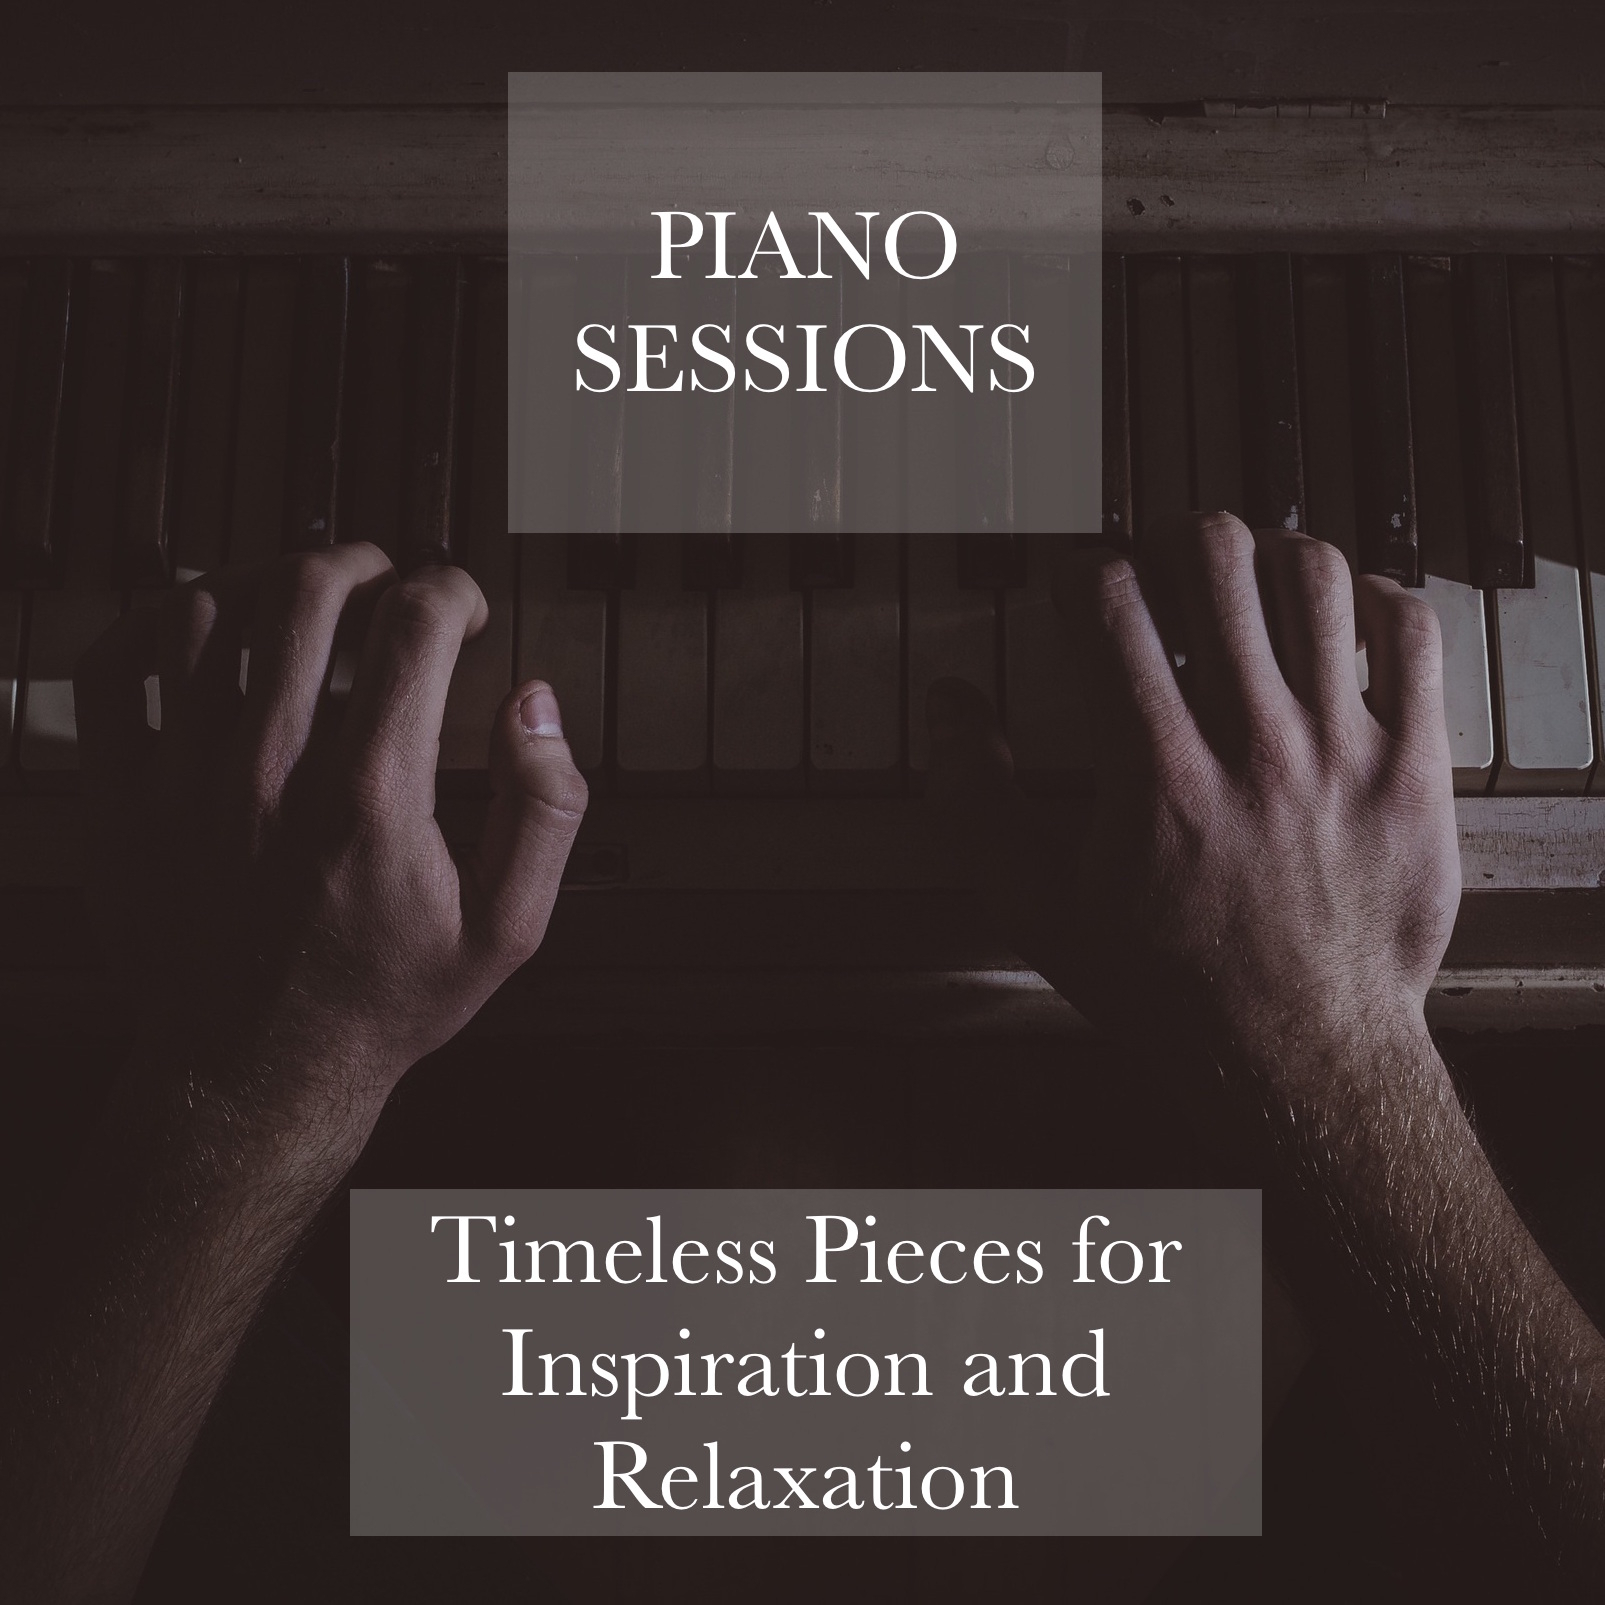 Piano Sessions - Timeless Pieces for Inspiration and Relaxation